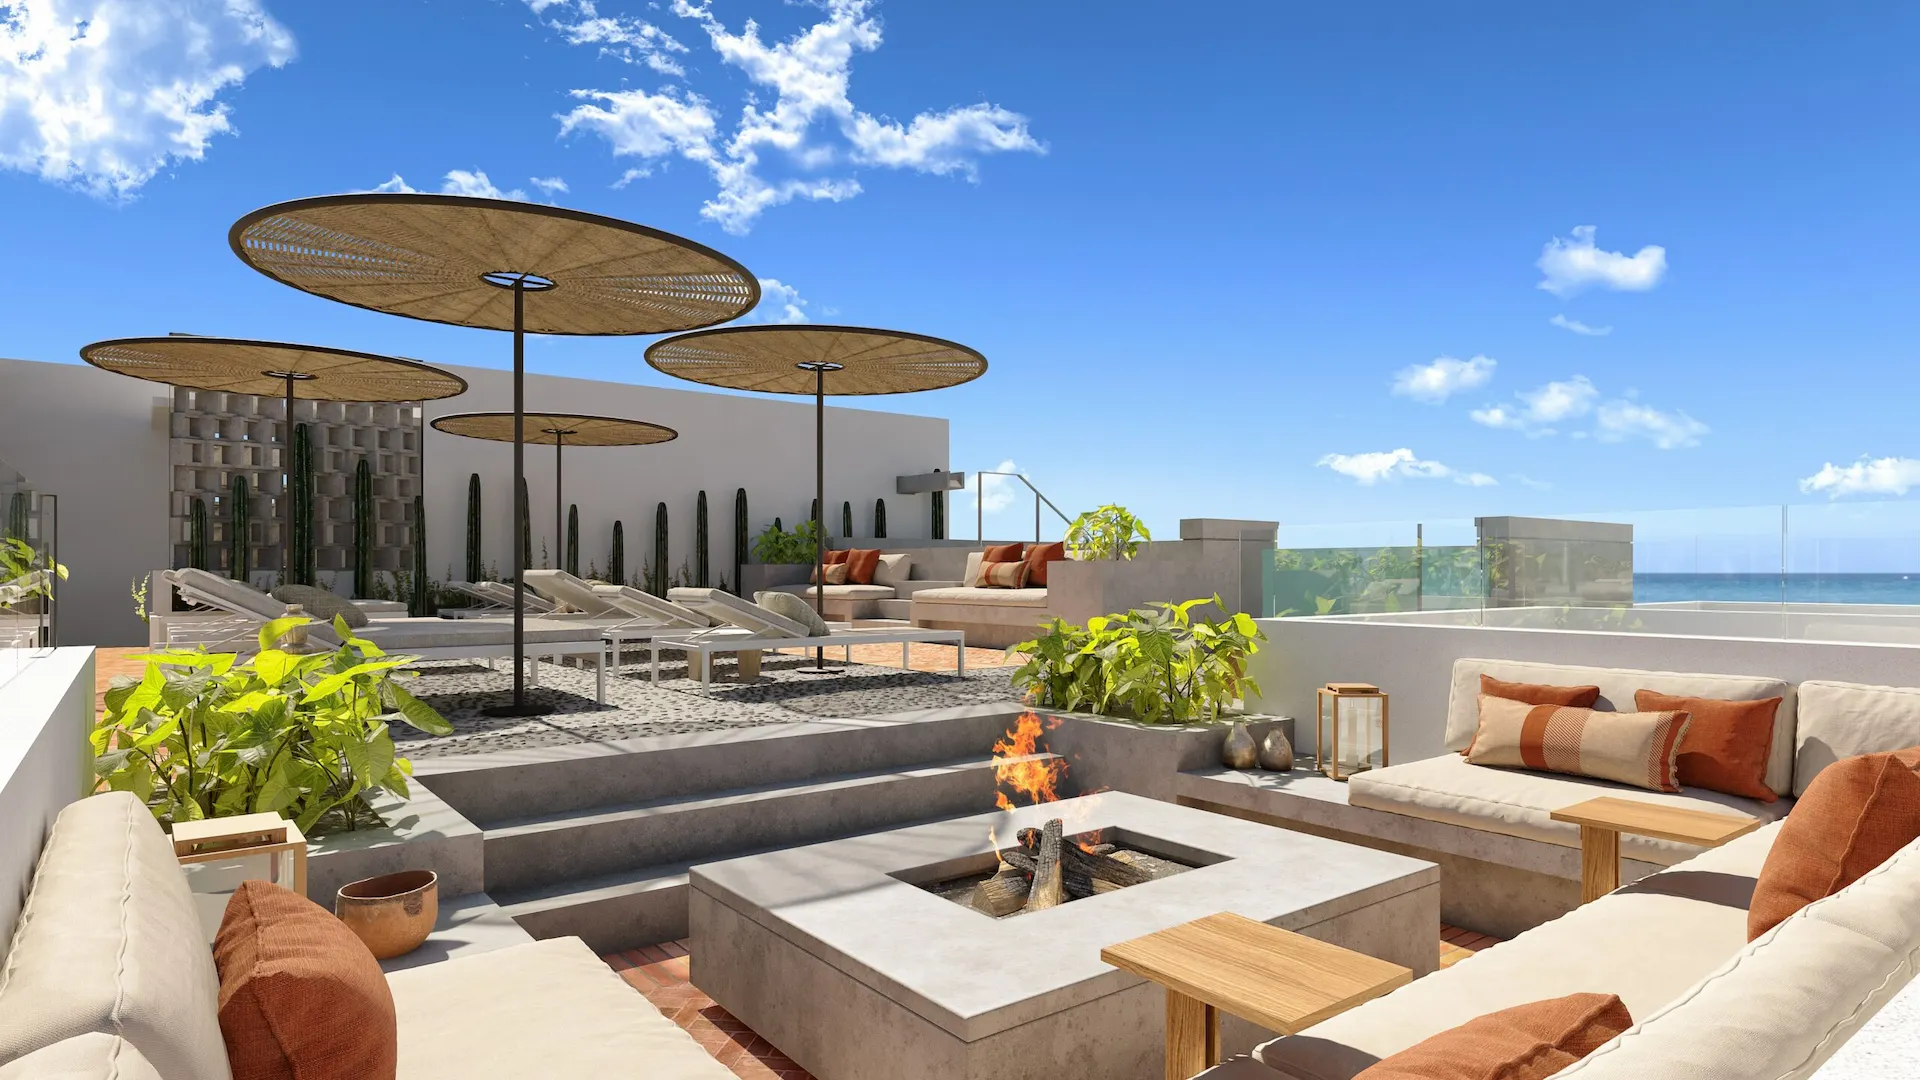 Rooftop terrace with sofas, sun chairs, umbrellas, and sea views